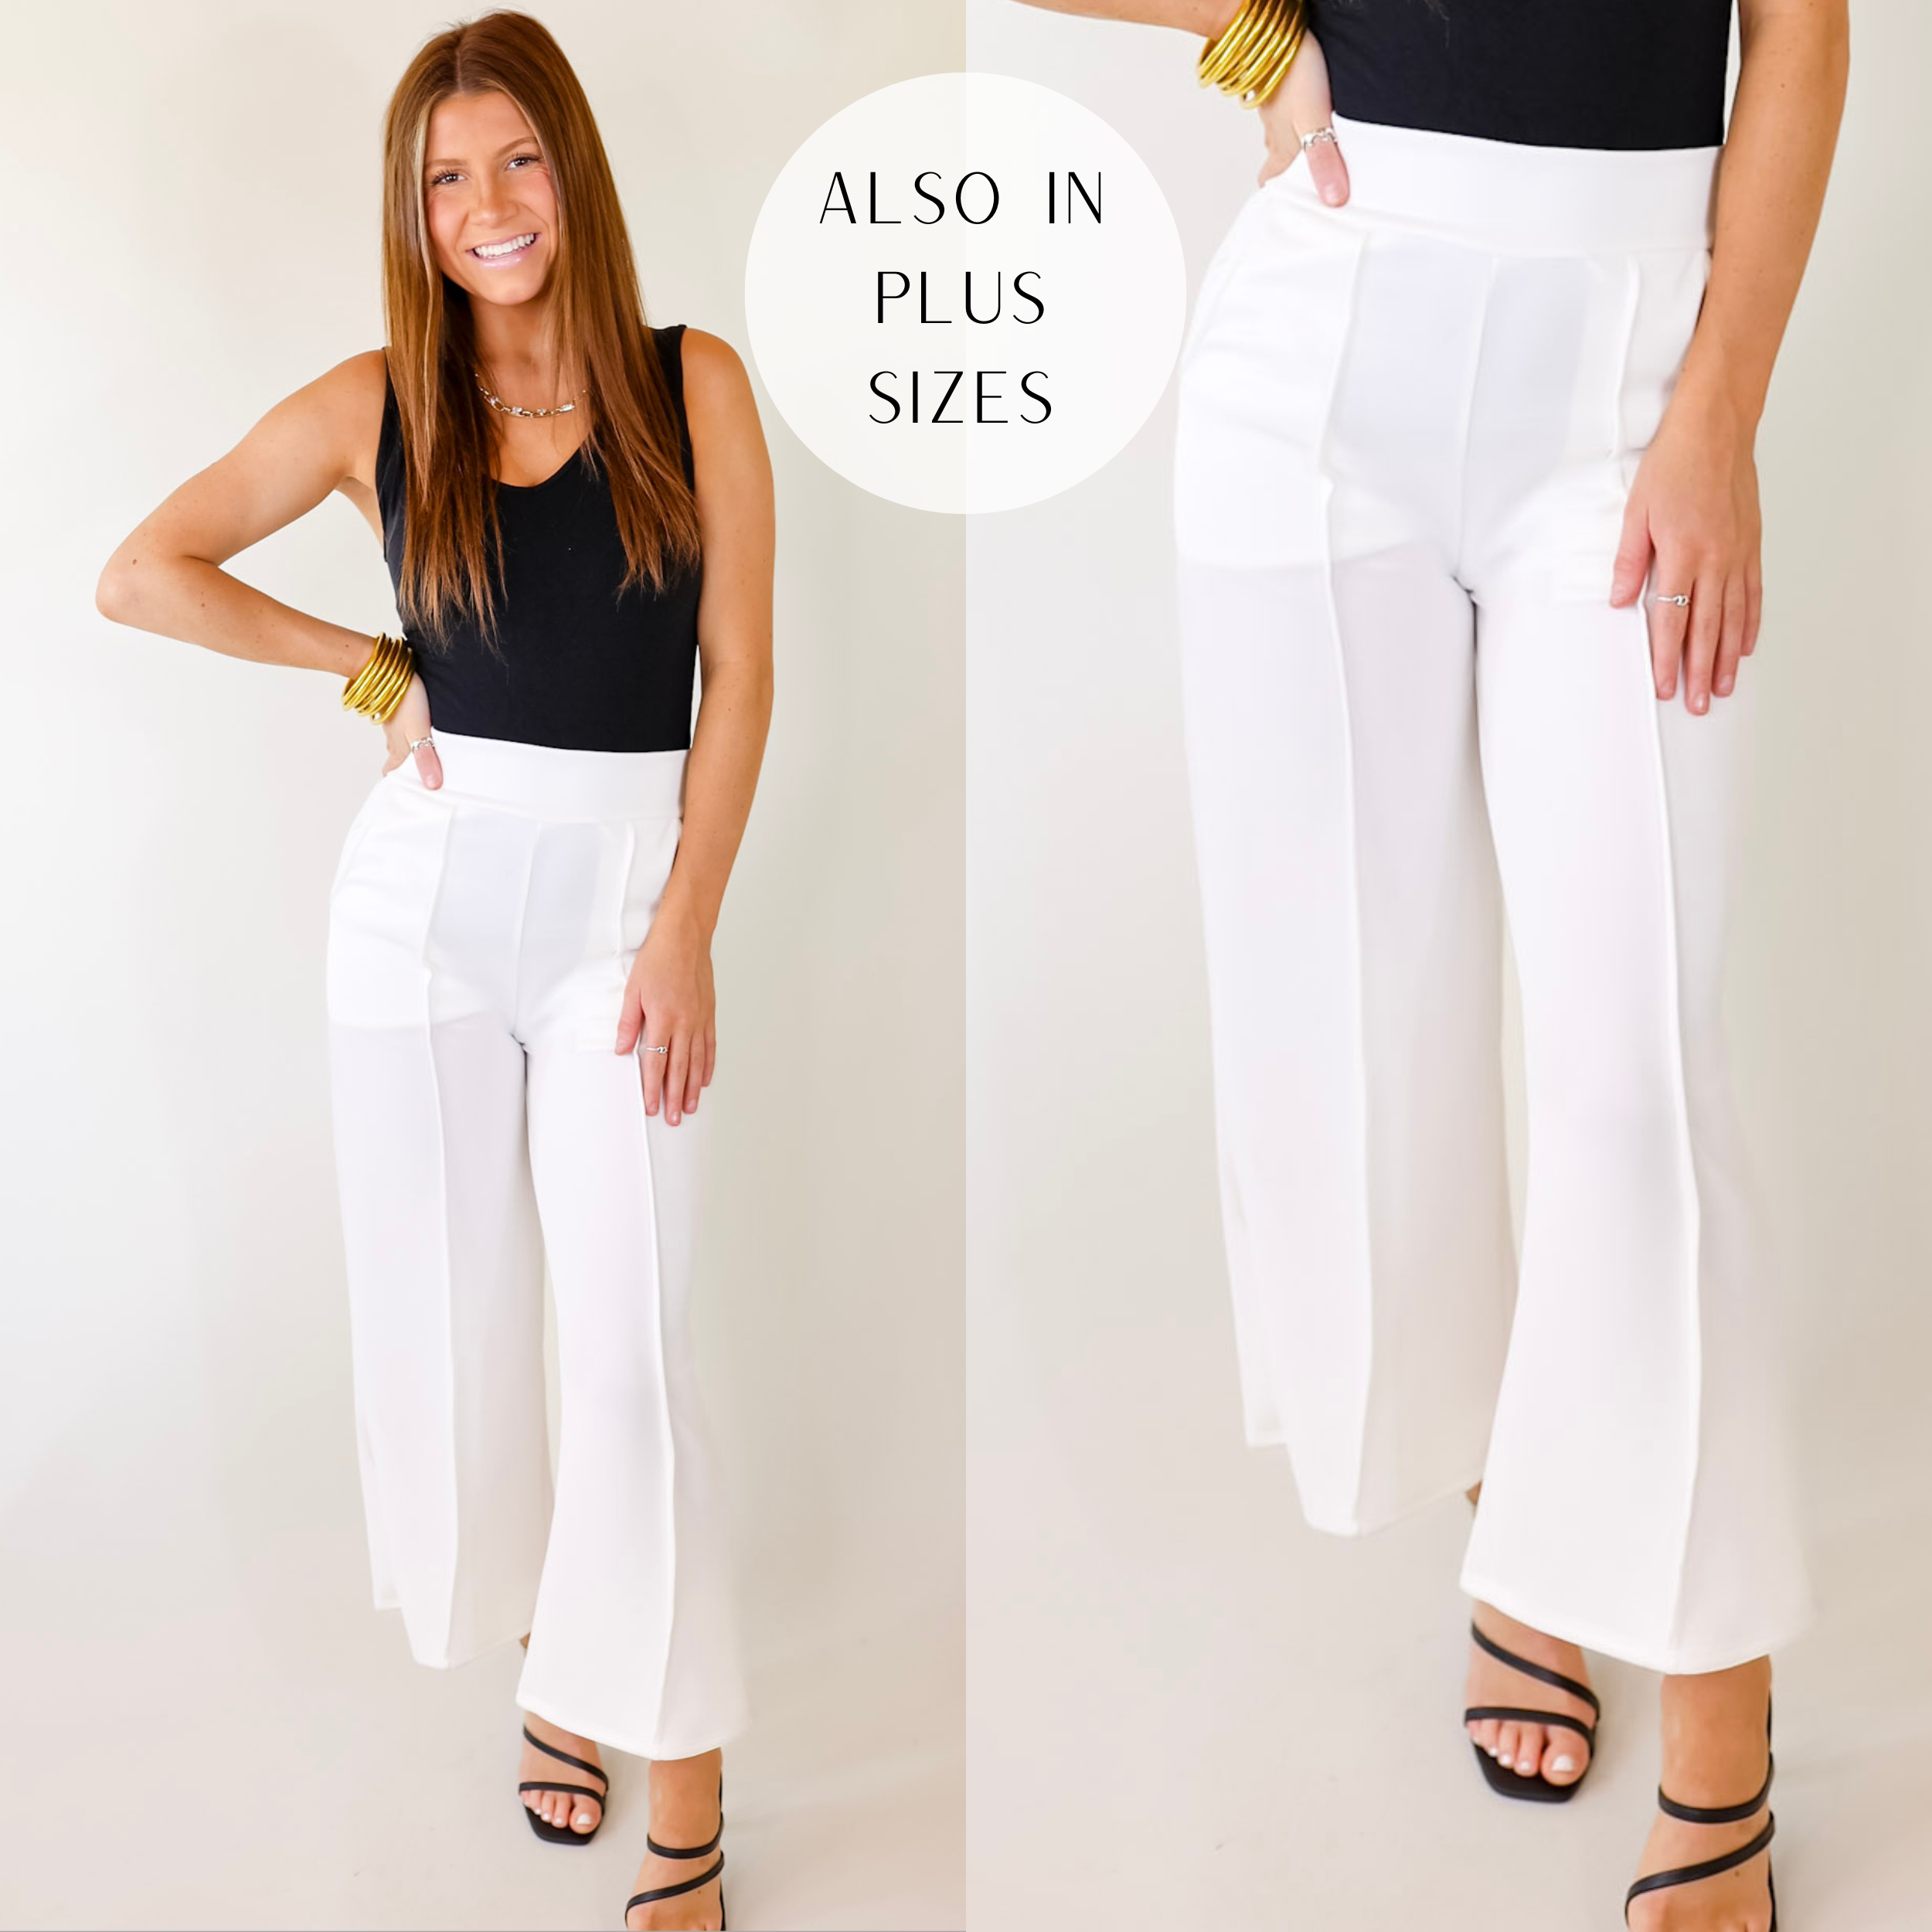 A pair of white mid rise pants with a front pleat on both legs, pockets, and a straight leg style